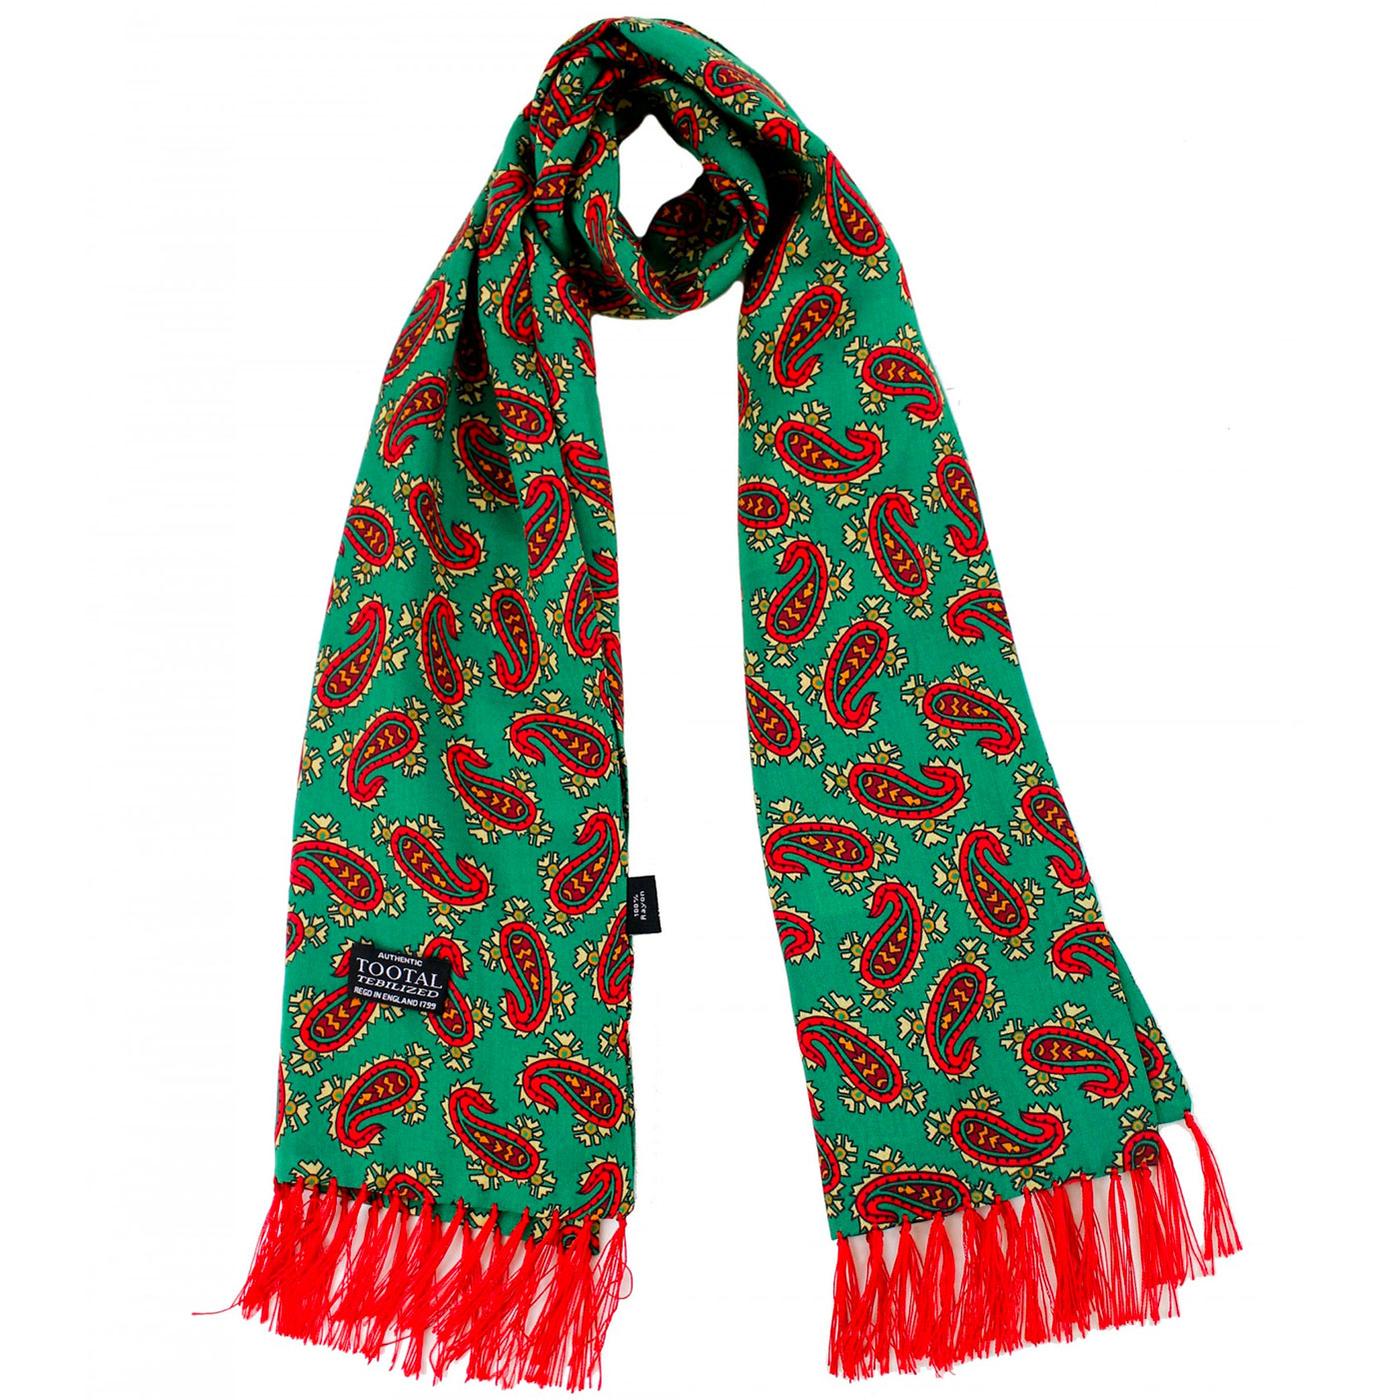 TOOTAL Retro Mod 60s Paisley Rayon Scarf in Green